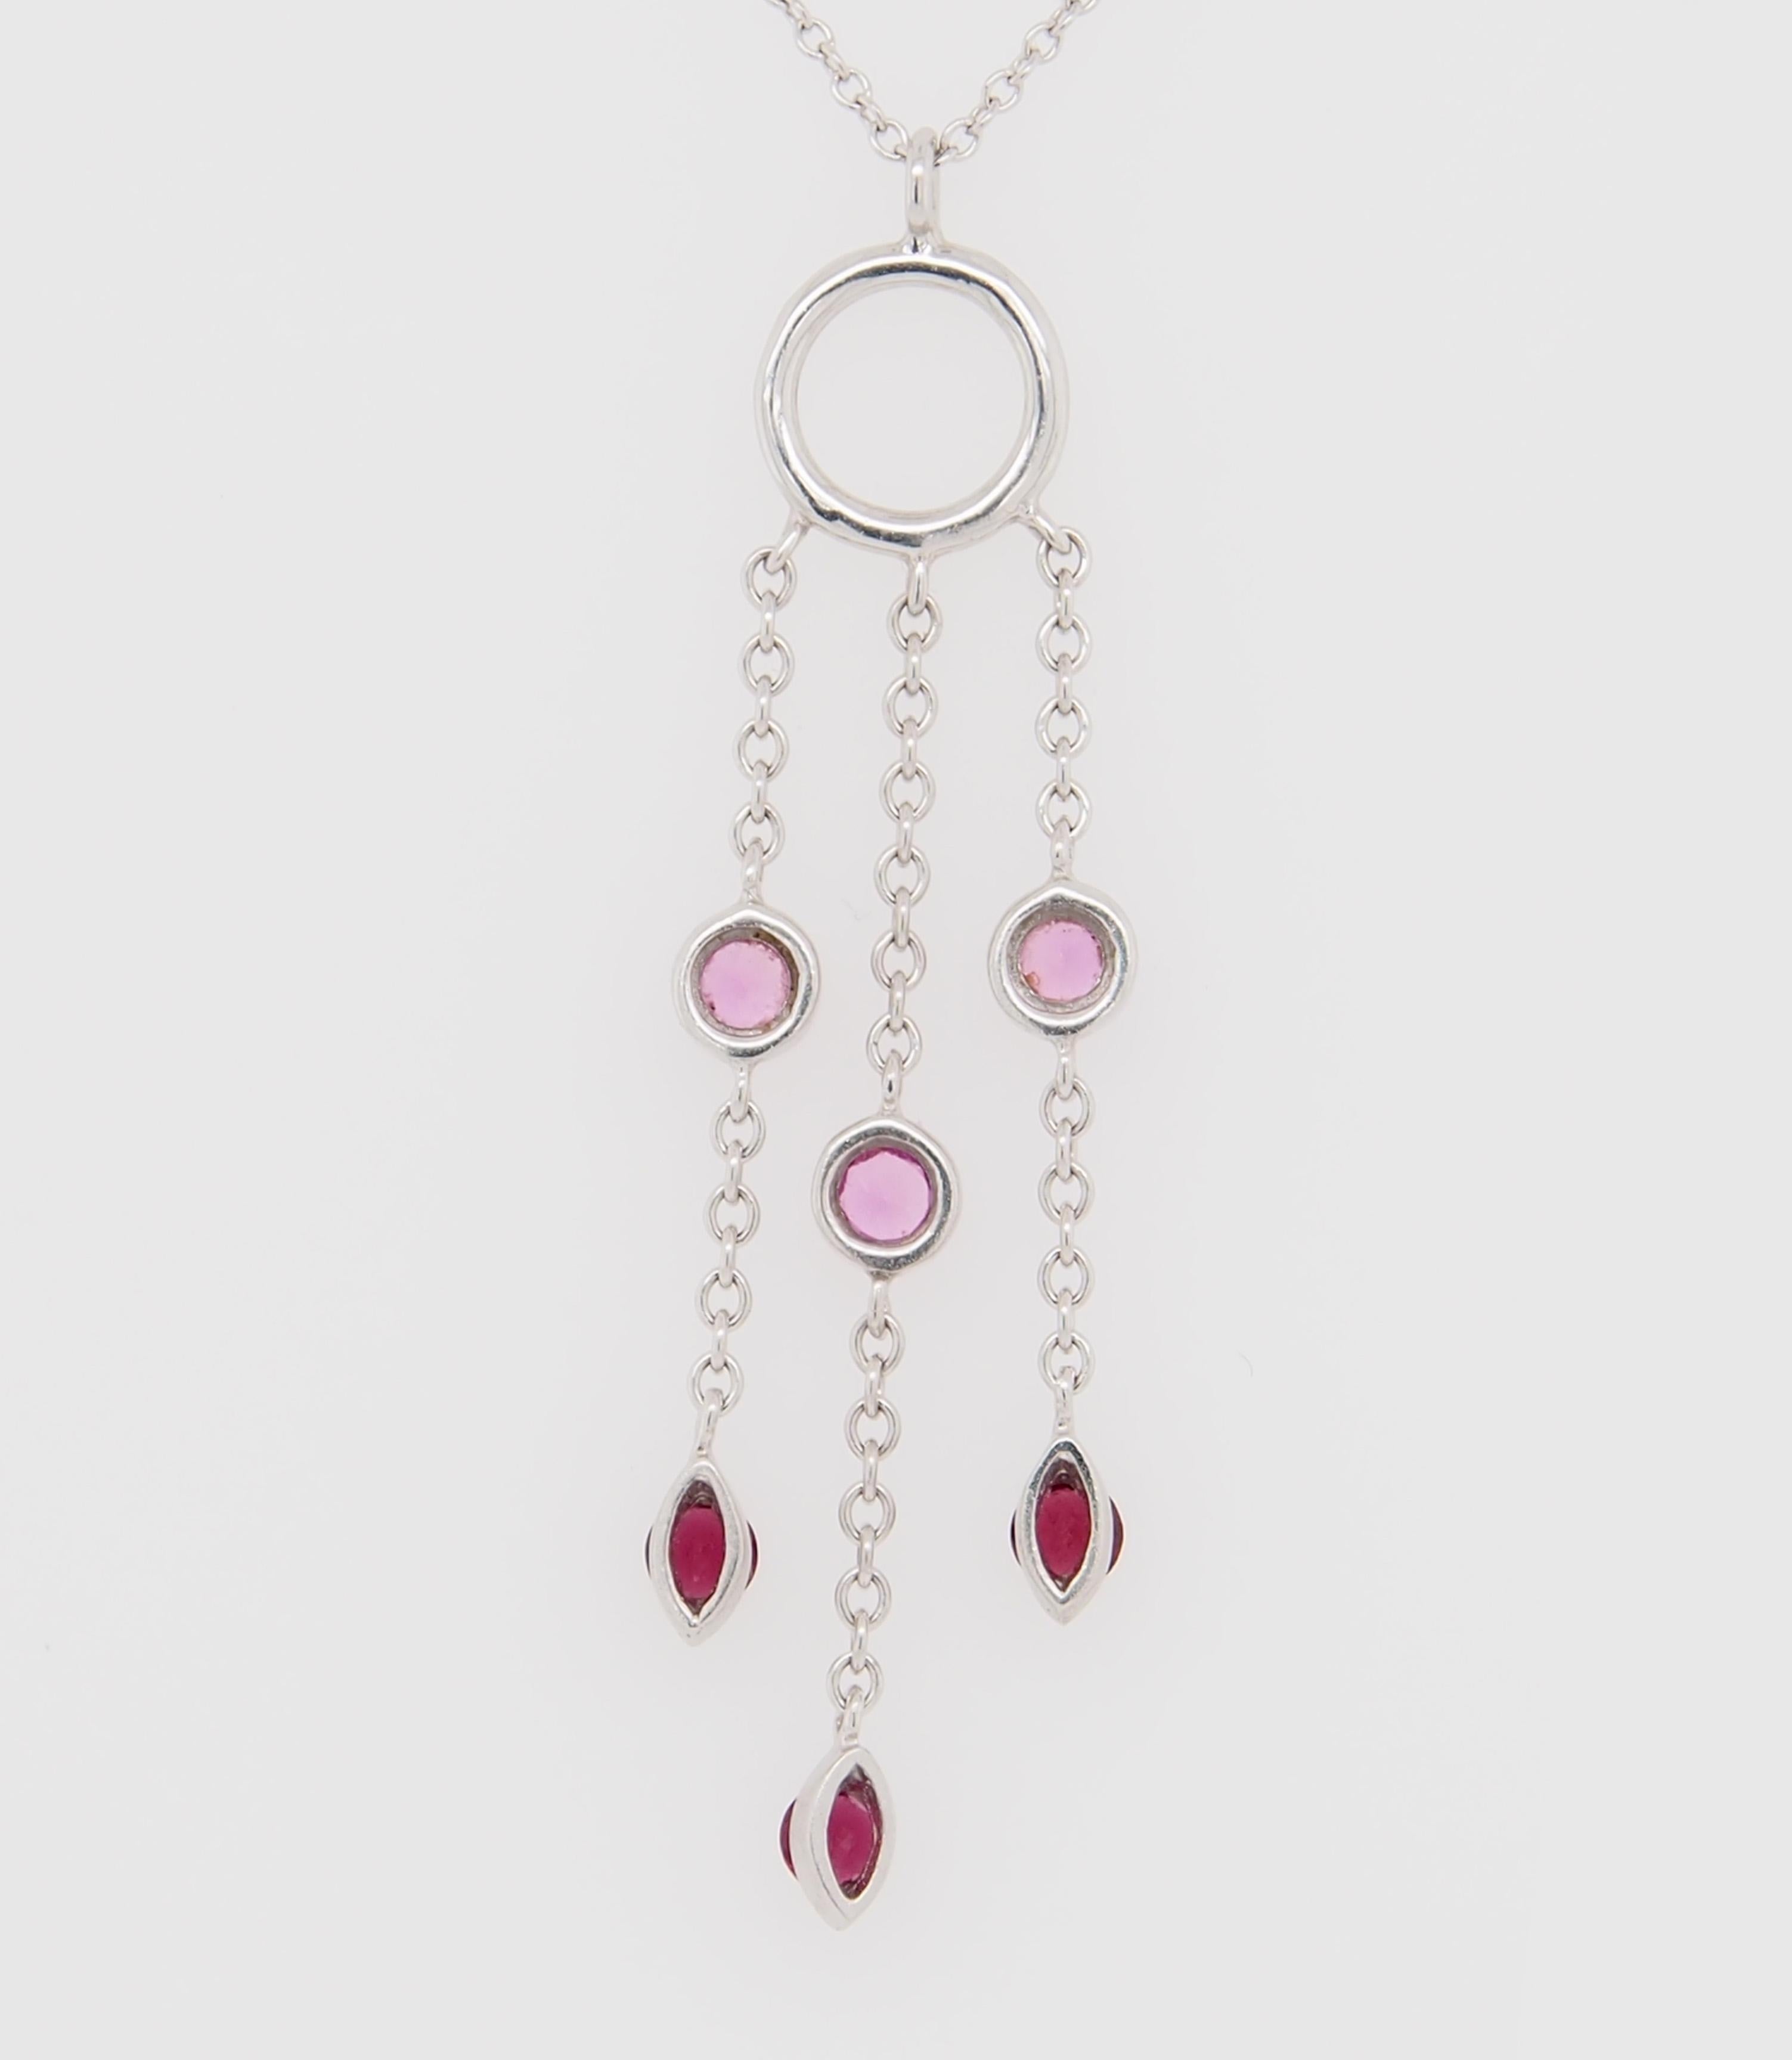 A Tiffany and Co 18K white gold fringe dangle Necklace. (3) Round Pink Sapphires and (3) Round Red Garnet Dangle from a ring. The necklace is 16 inches long, the fringe is 1 1/4 inches. Weighs 3.7 grams.

